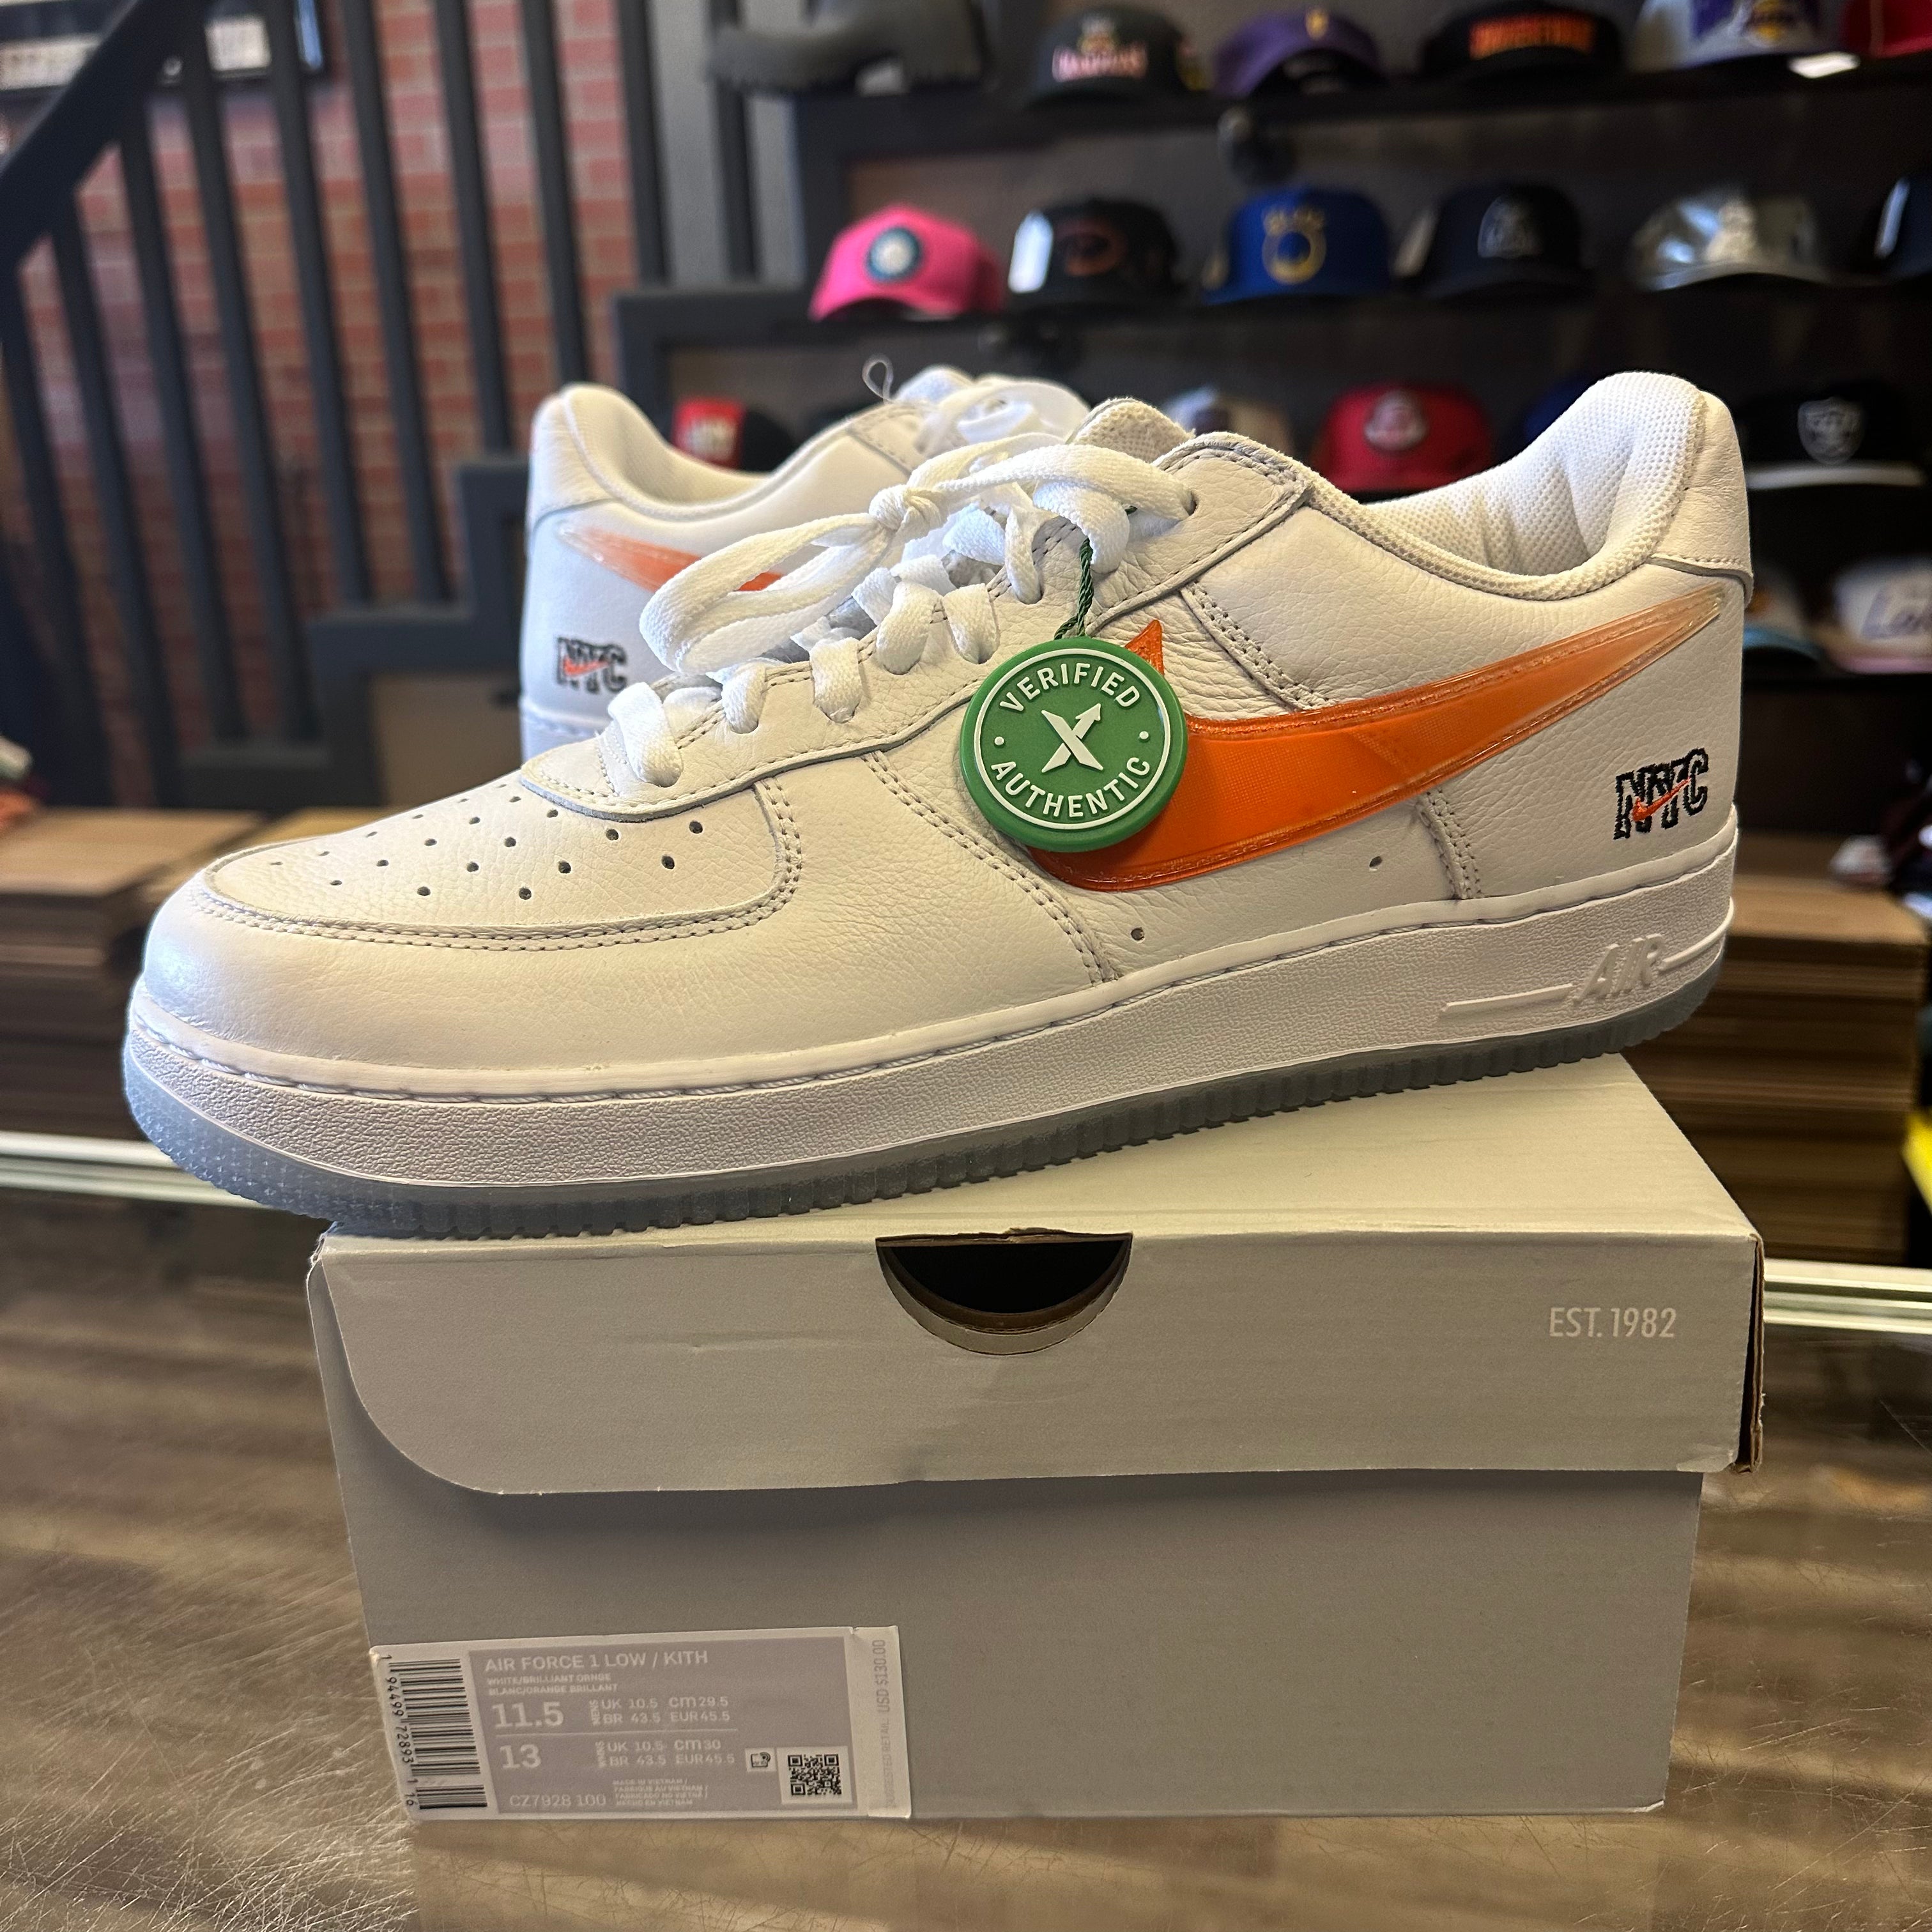 DS Nike Air Force 1 Low Kith Knicks – Yesterday's Fits